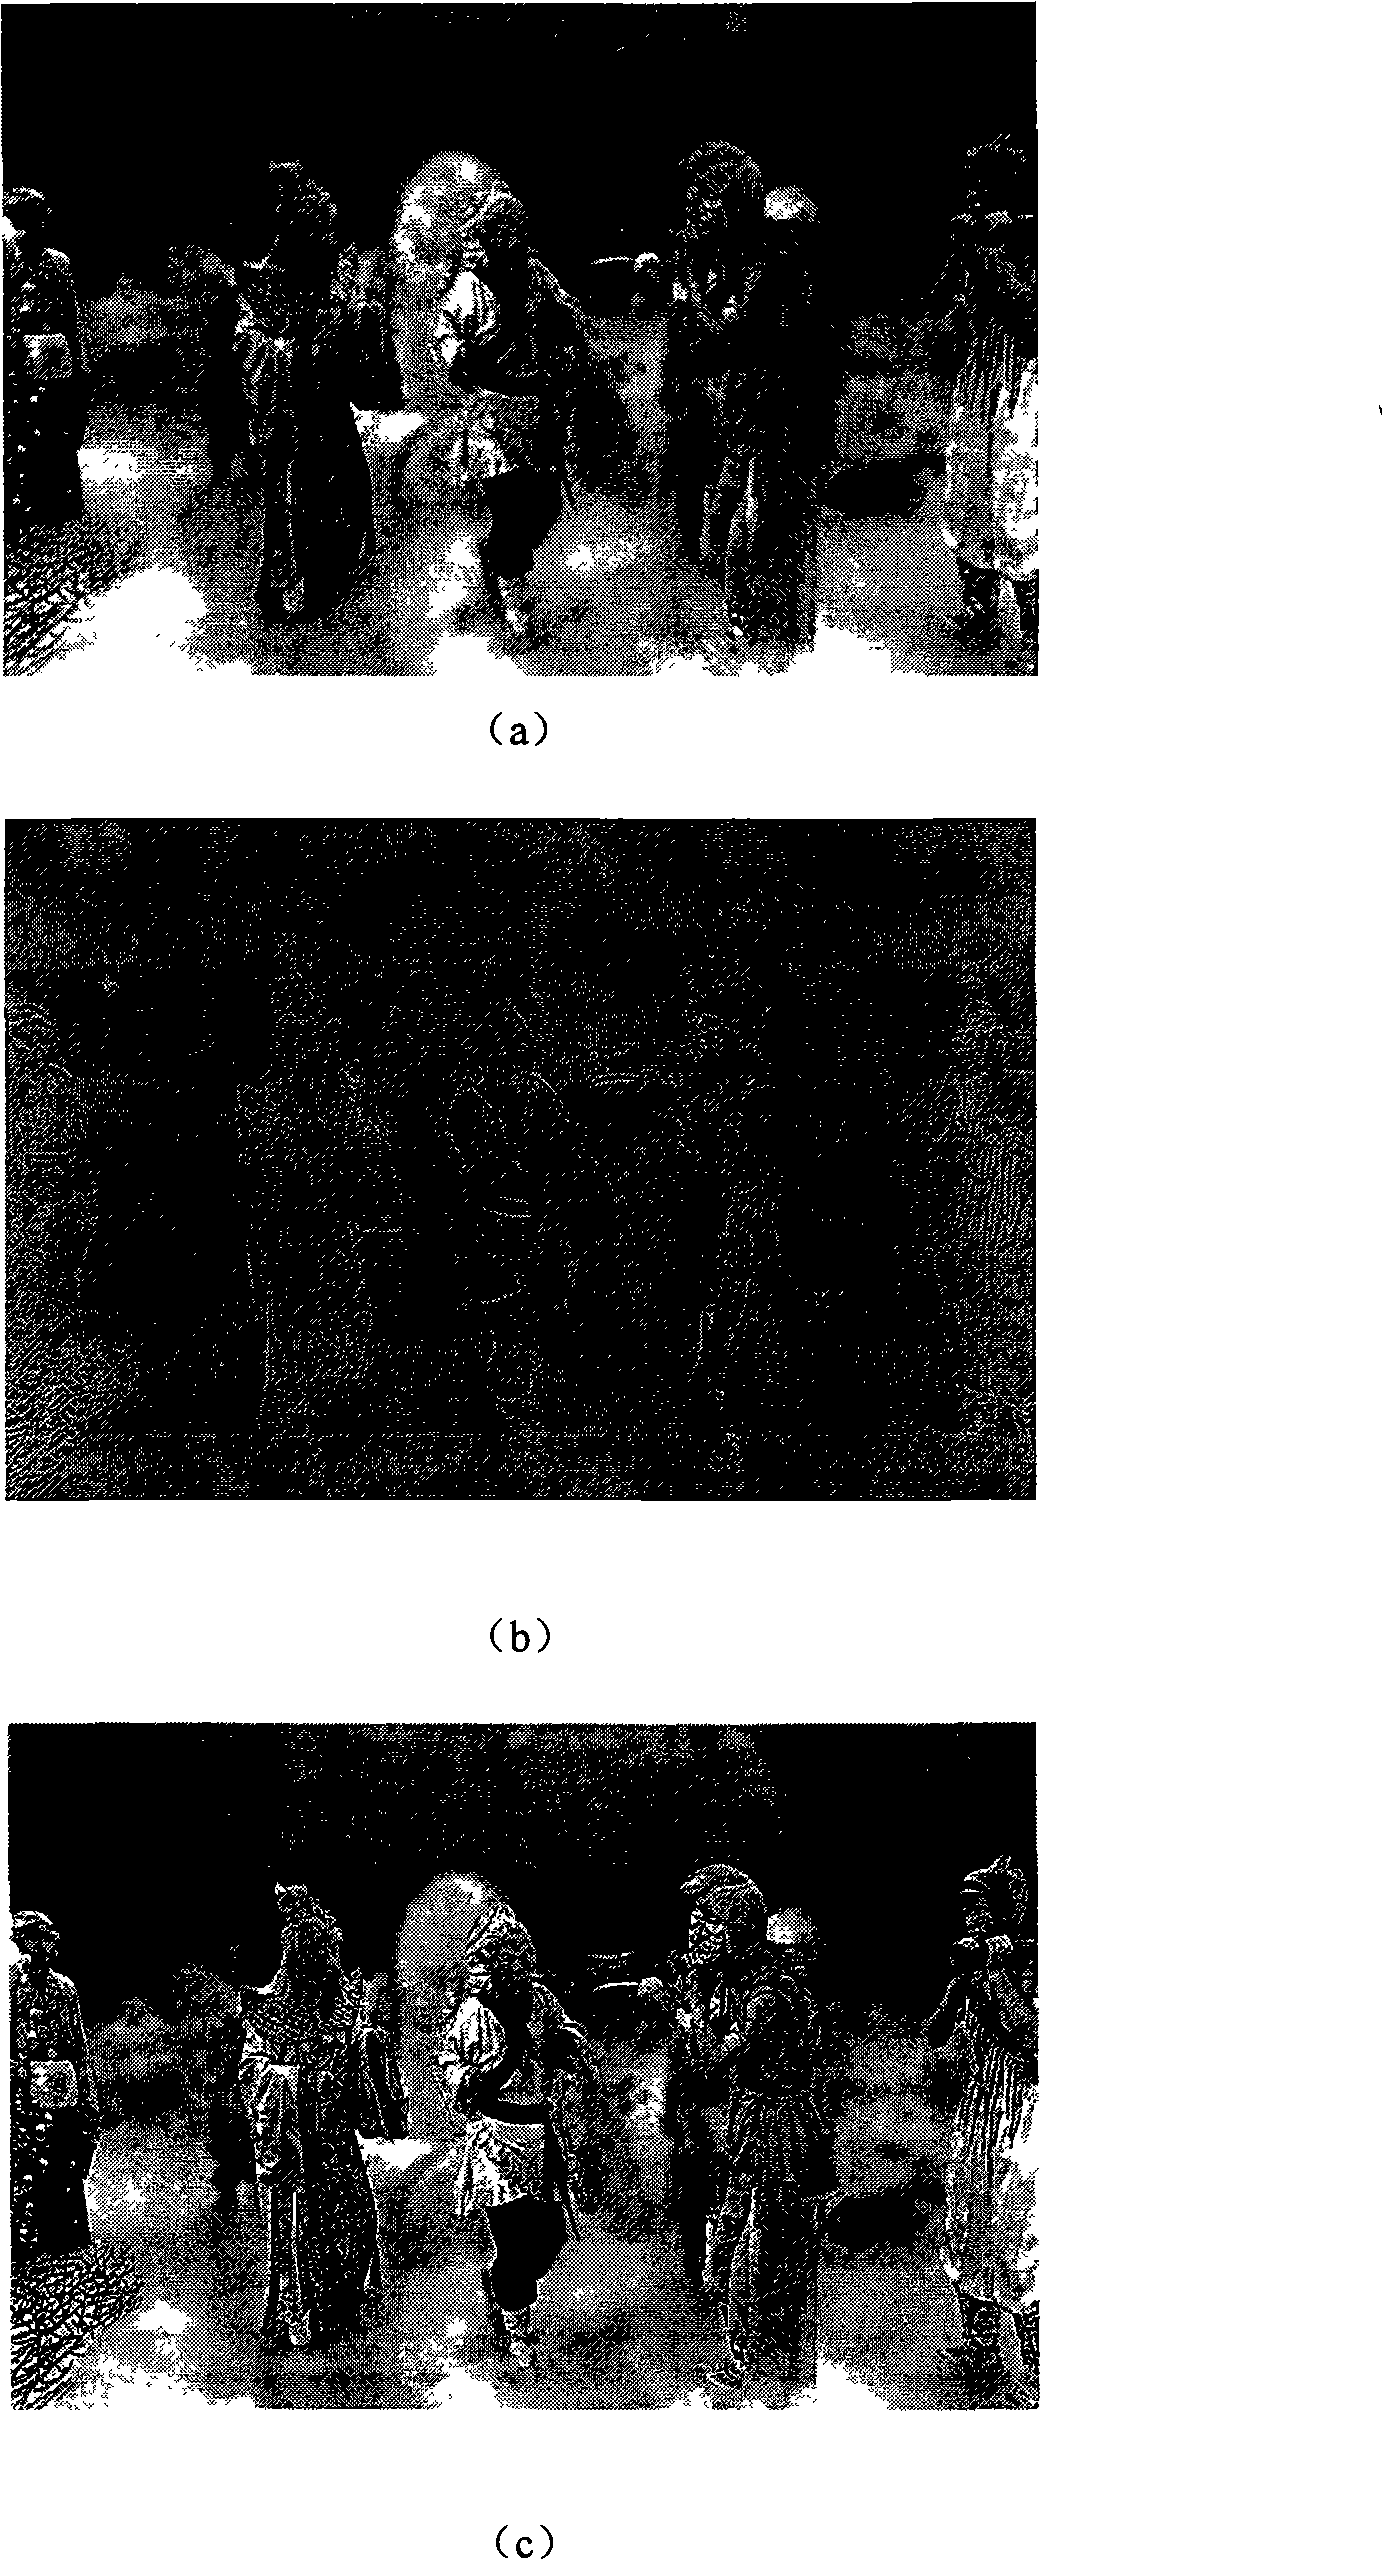 Method for converting flat video to tridimensional video based on real-time dialog between human and machine